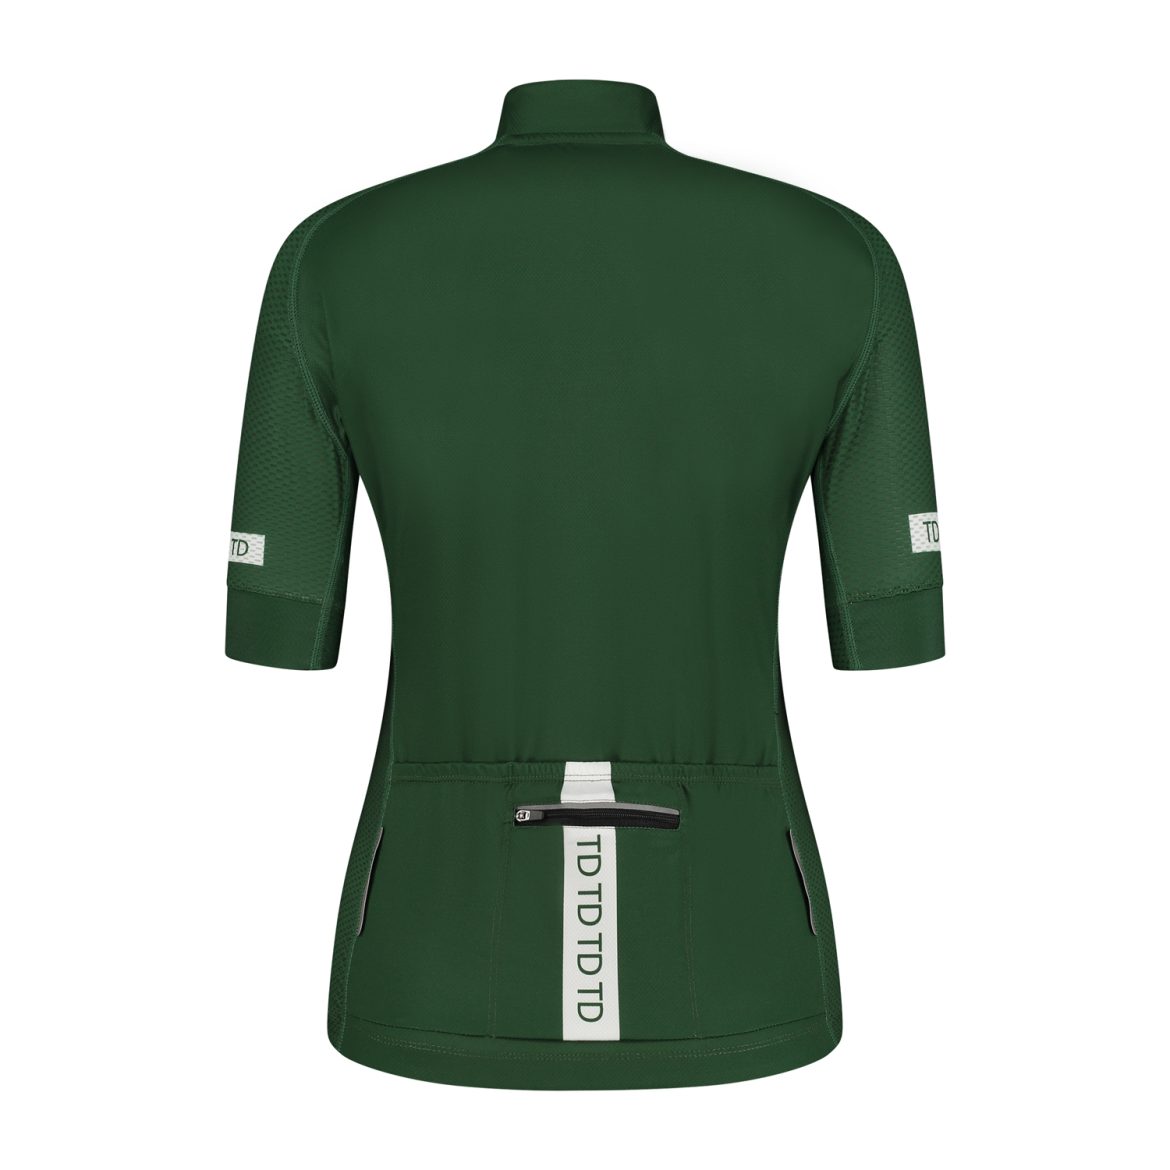 Backside ladies cycling jersey dark green with 3 back pockets from TD Sportswear